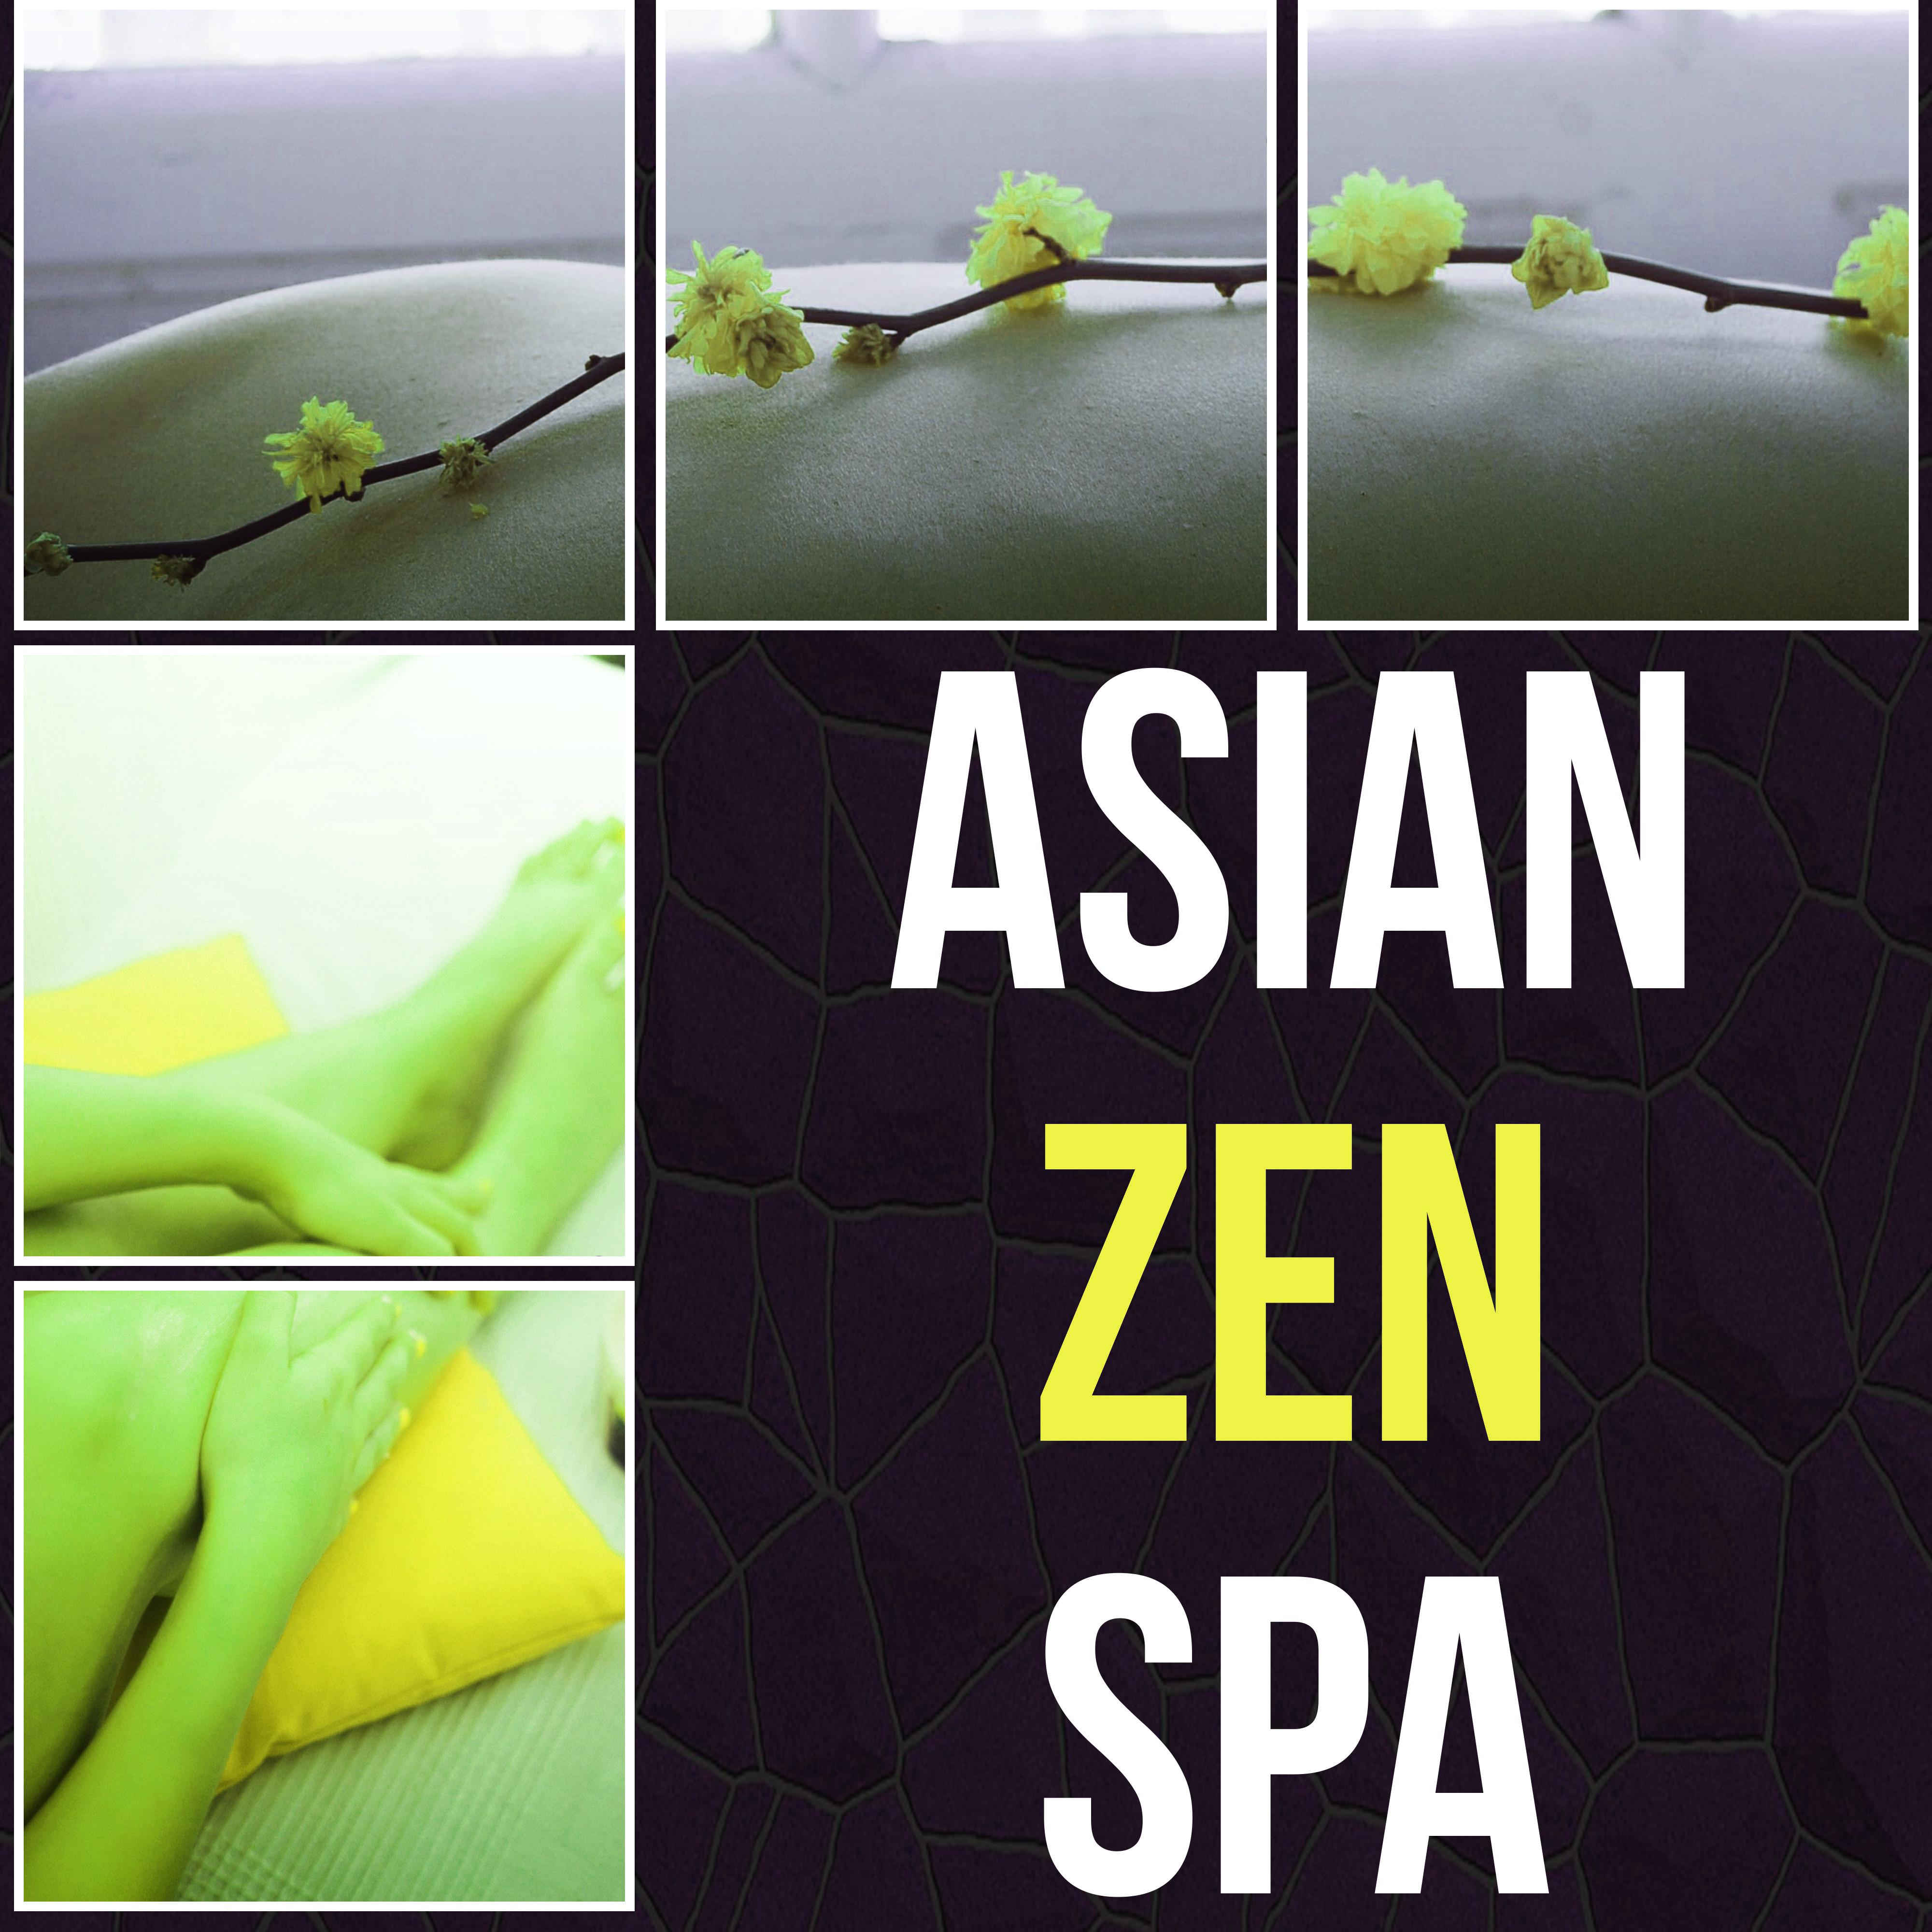 Asian Zen SPA – Massage Music to Relax, Music for Relaxation, Yoga Meditation, Sound Therapy, Nature Sounds, Stress Relief and Stress Reduction, Wellness Center